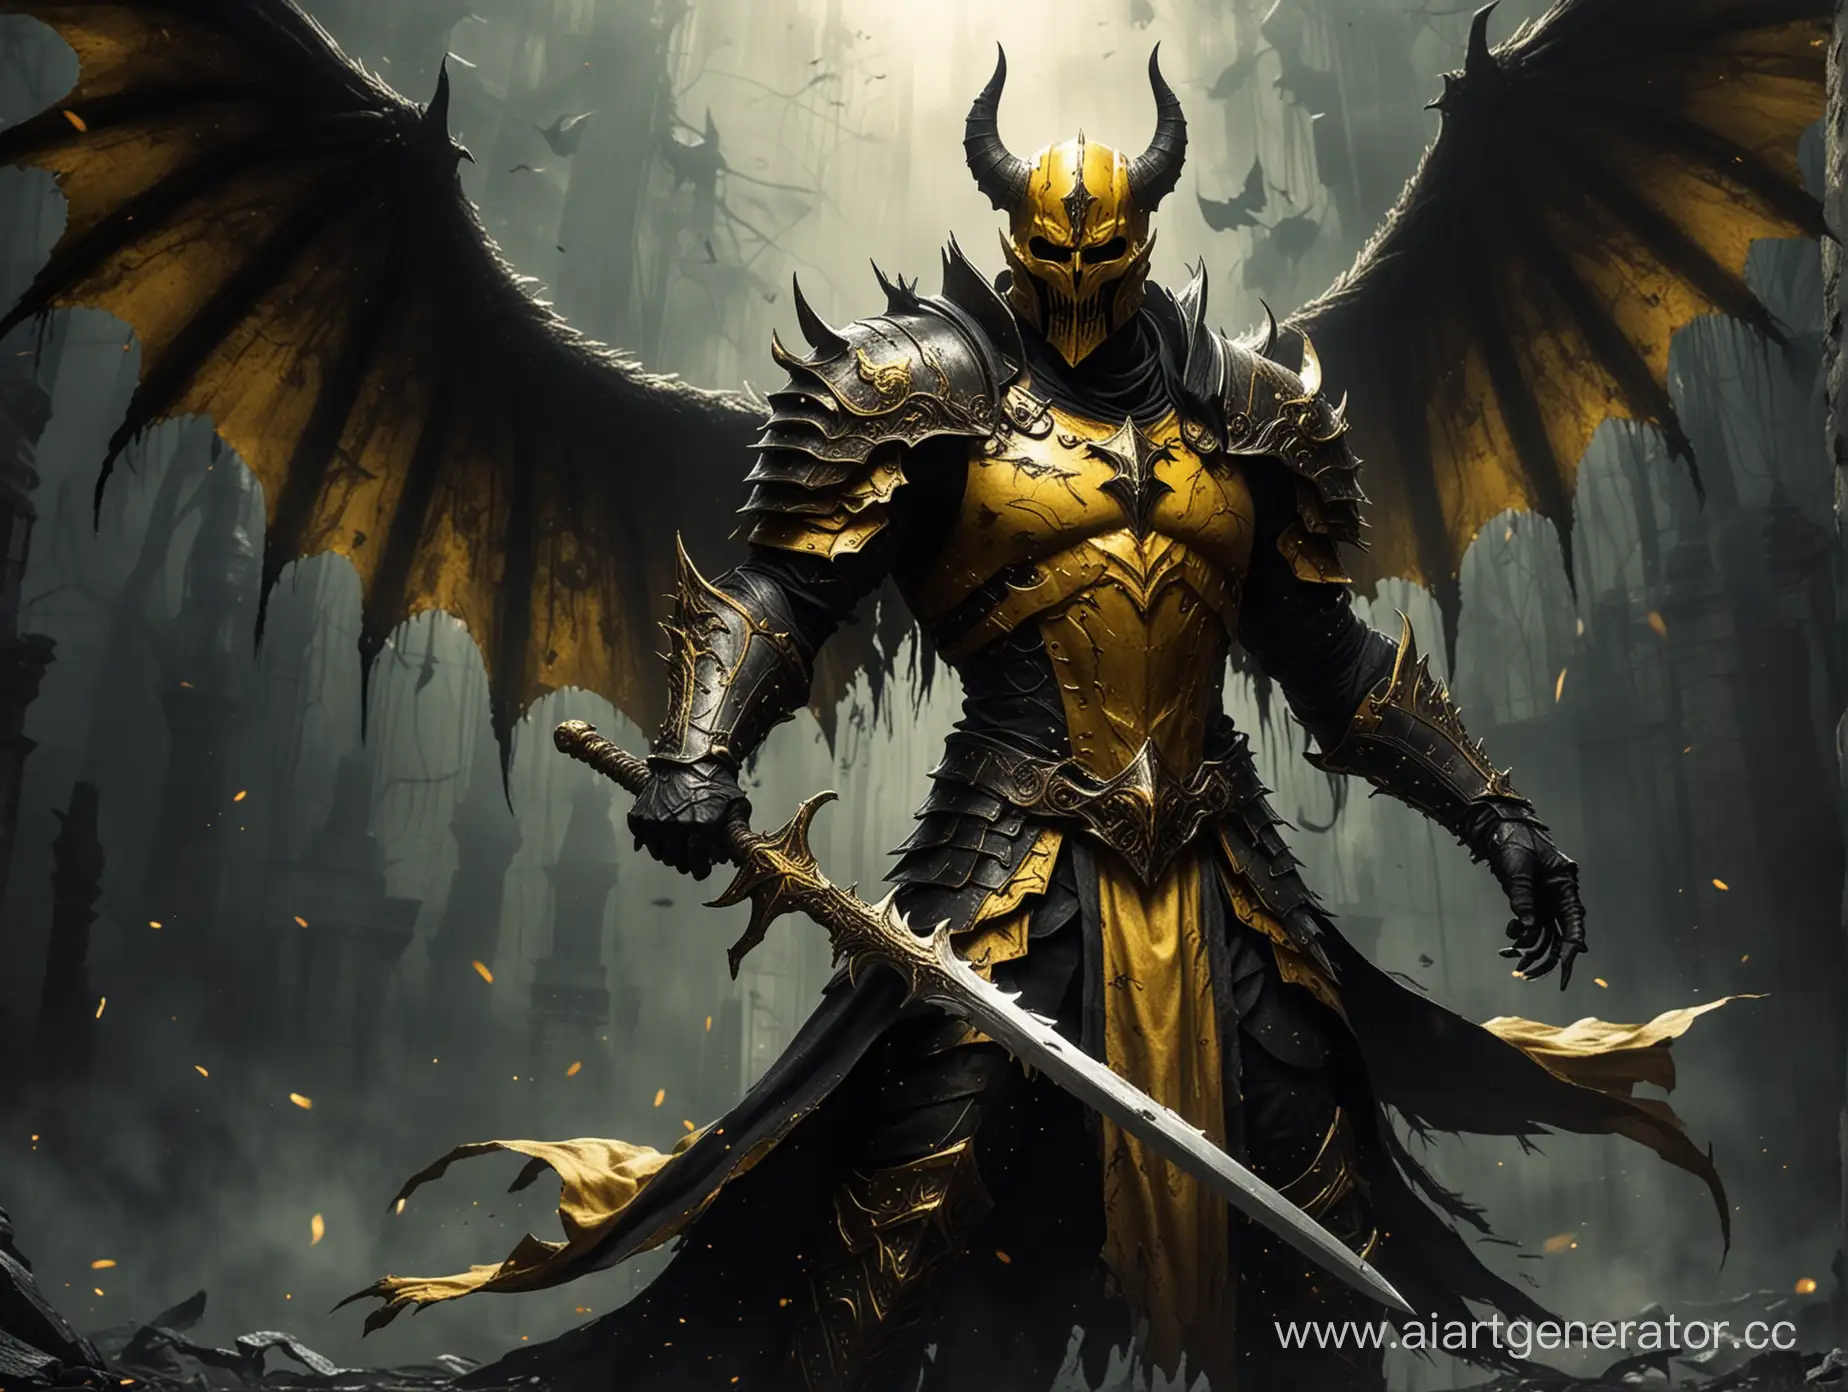 Golden-SwordWielding-Yellow-Knight-Confronts-Demon-with-Black-and-Yellow-Wings-in-Horrifying-Scene